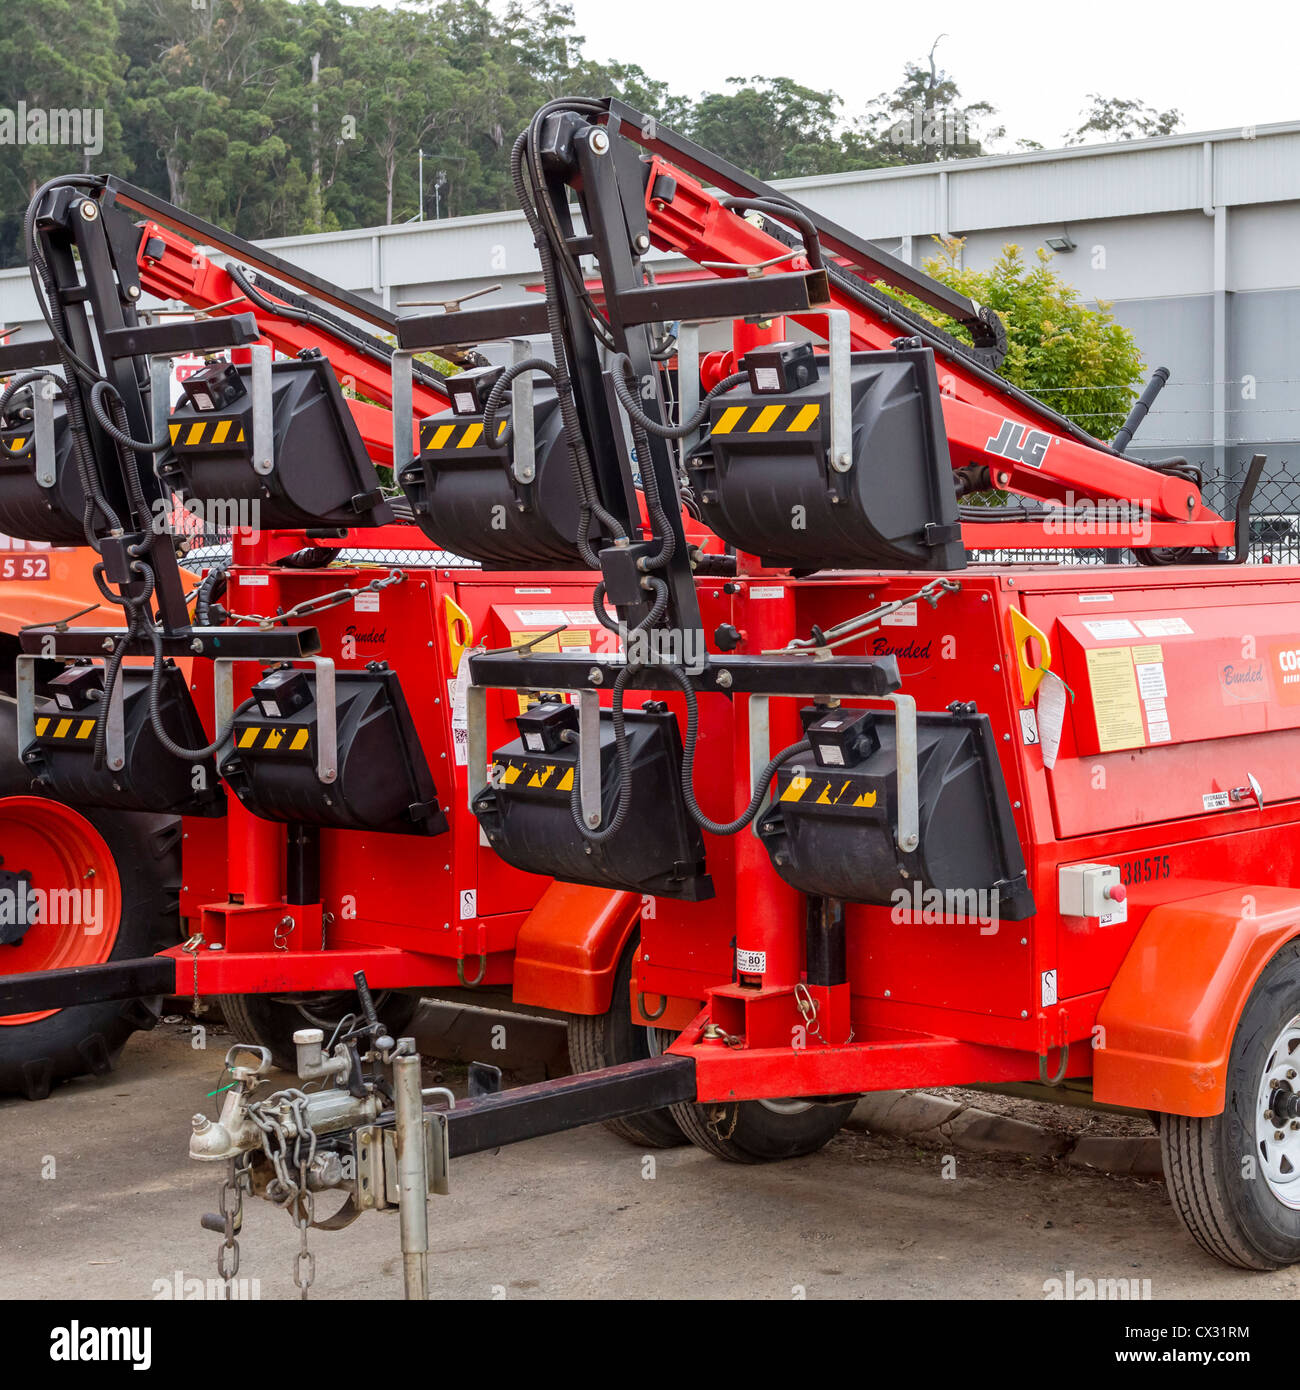 Mobile Industrial lighting machinery for hire at Sunshine Coast, Queensland, Australia Stock Photo